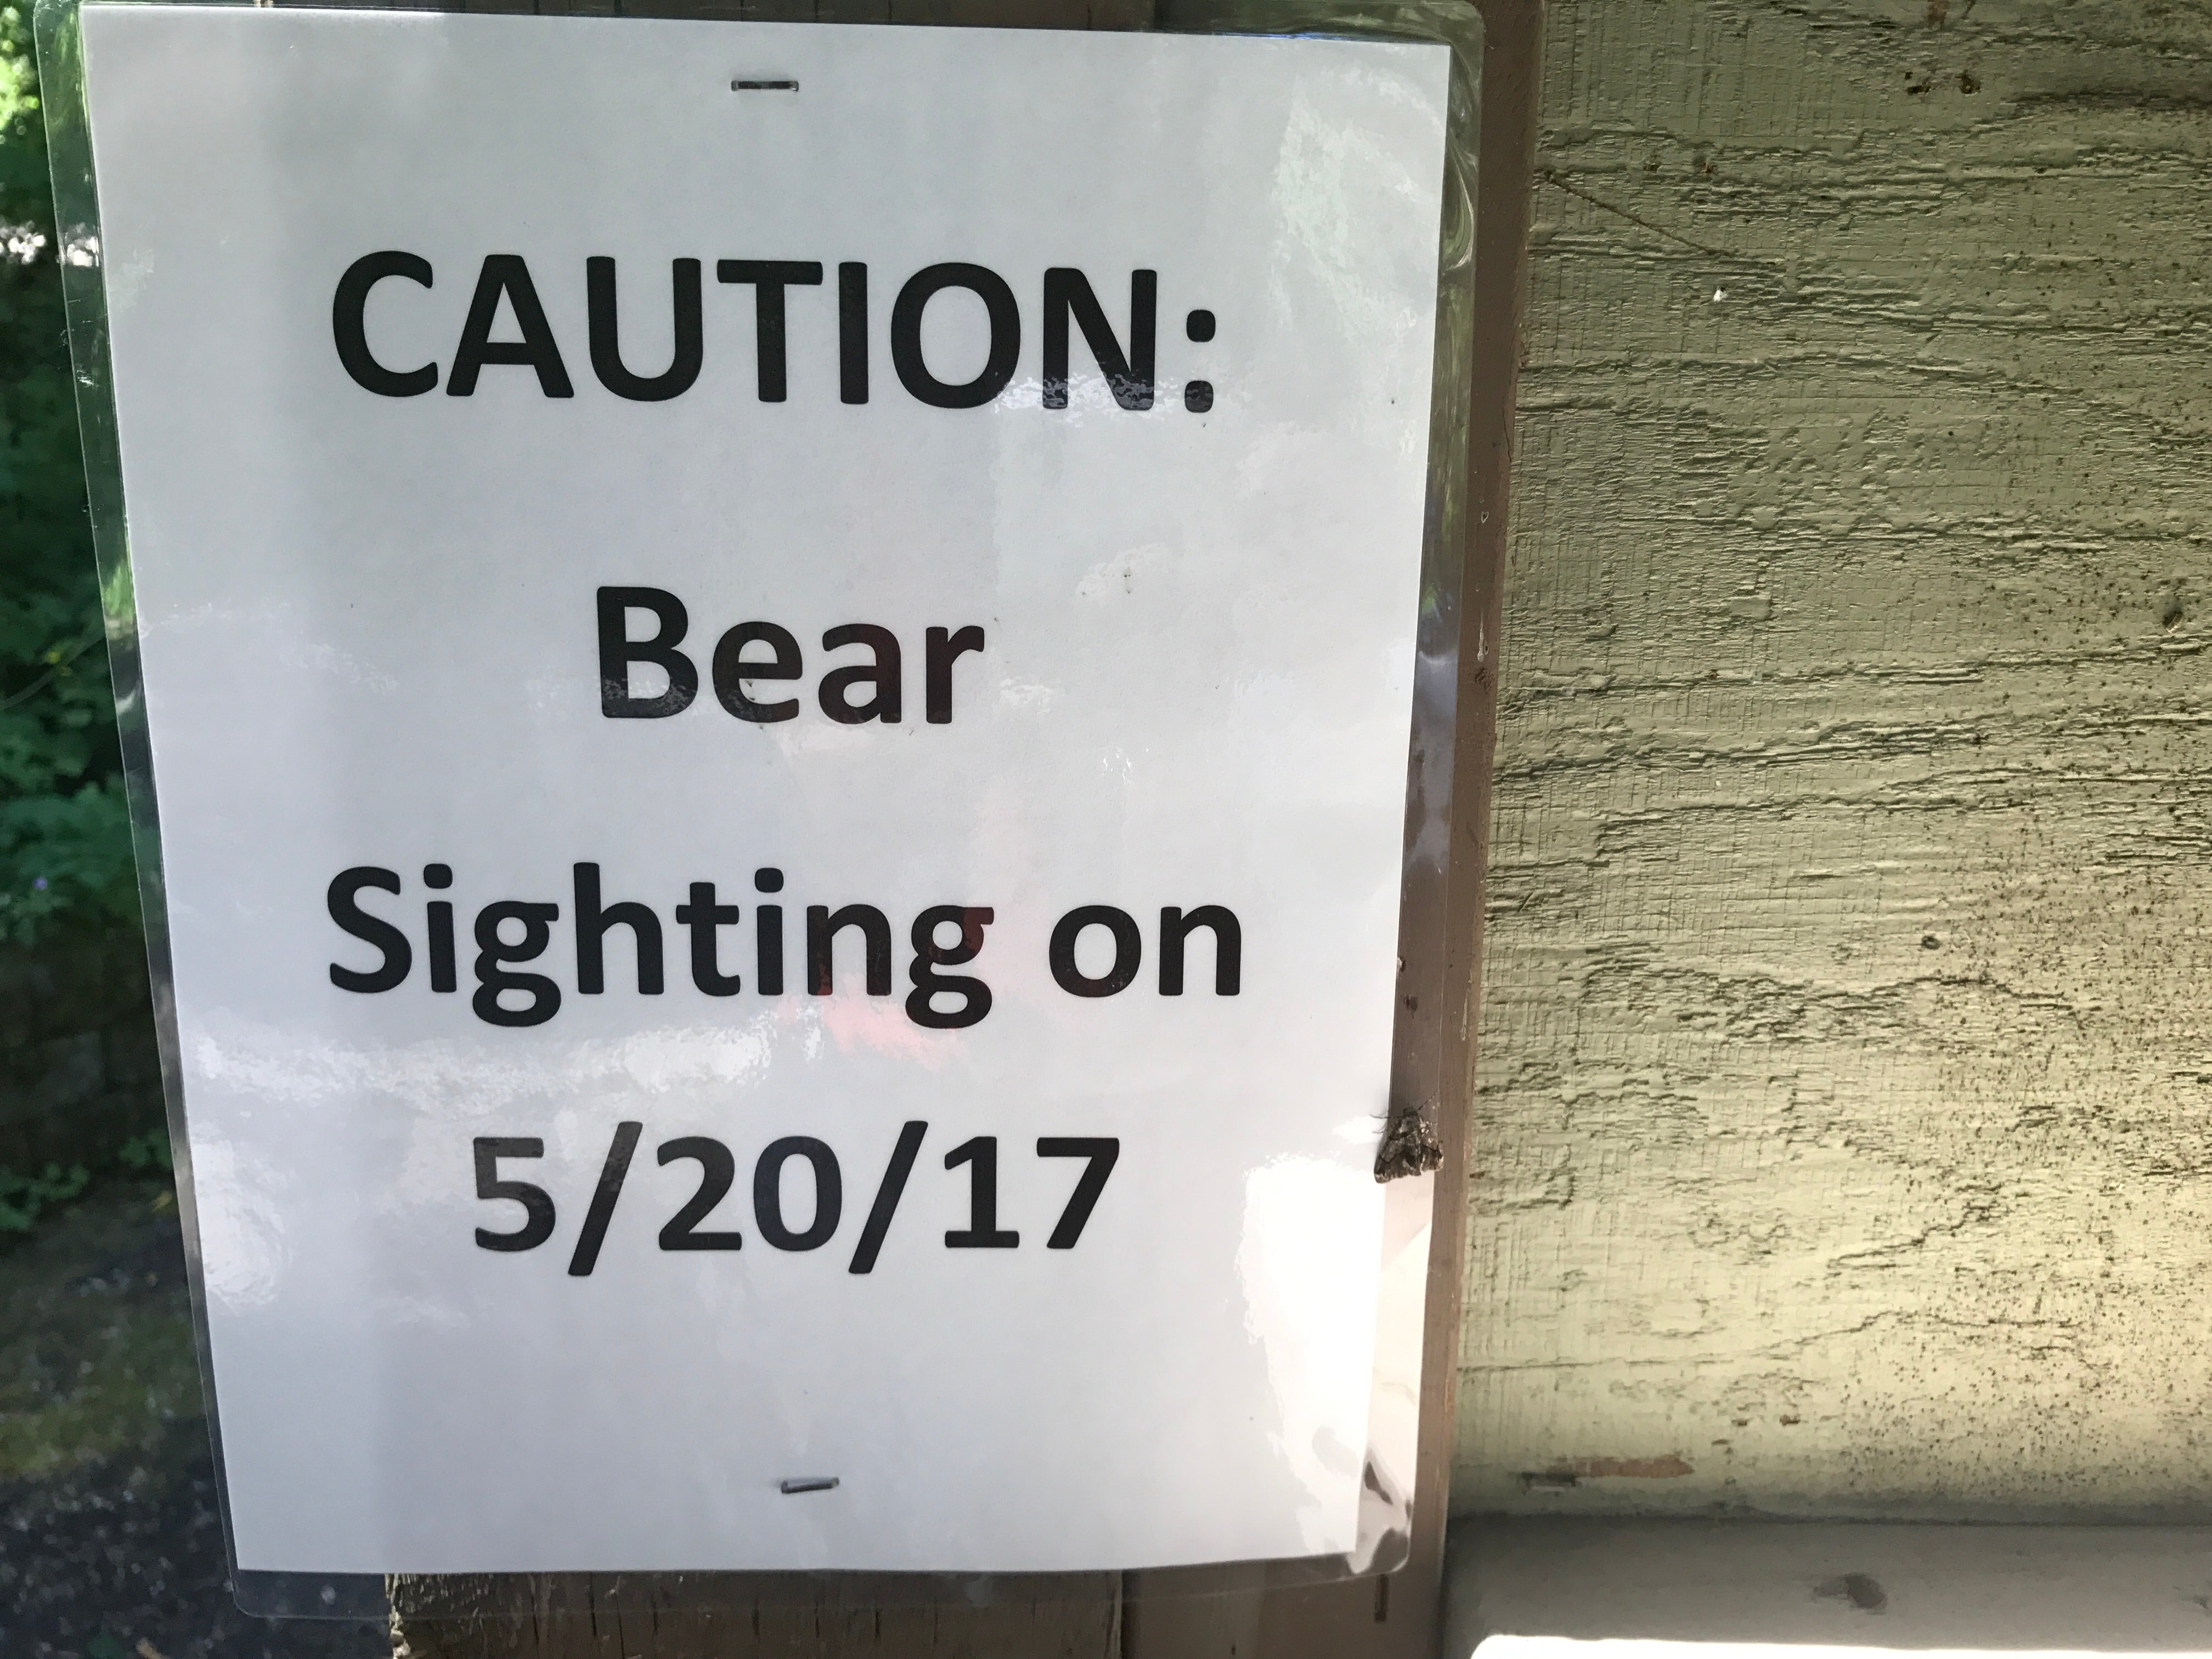 Never a sign you want to see in your campground.